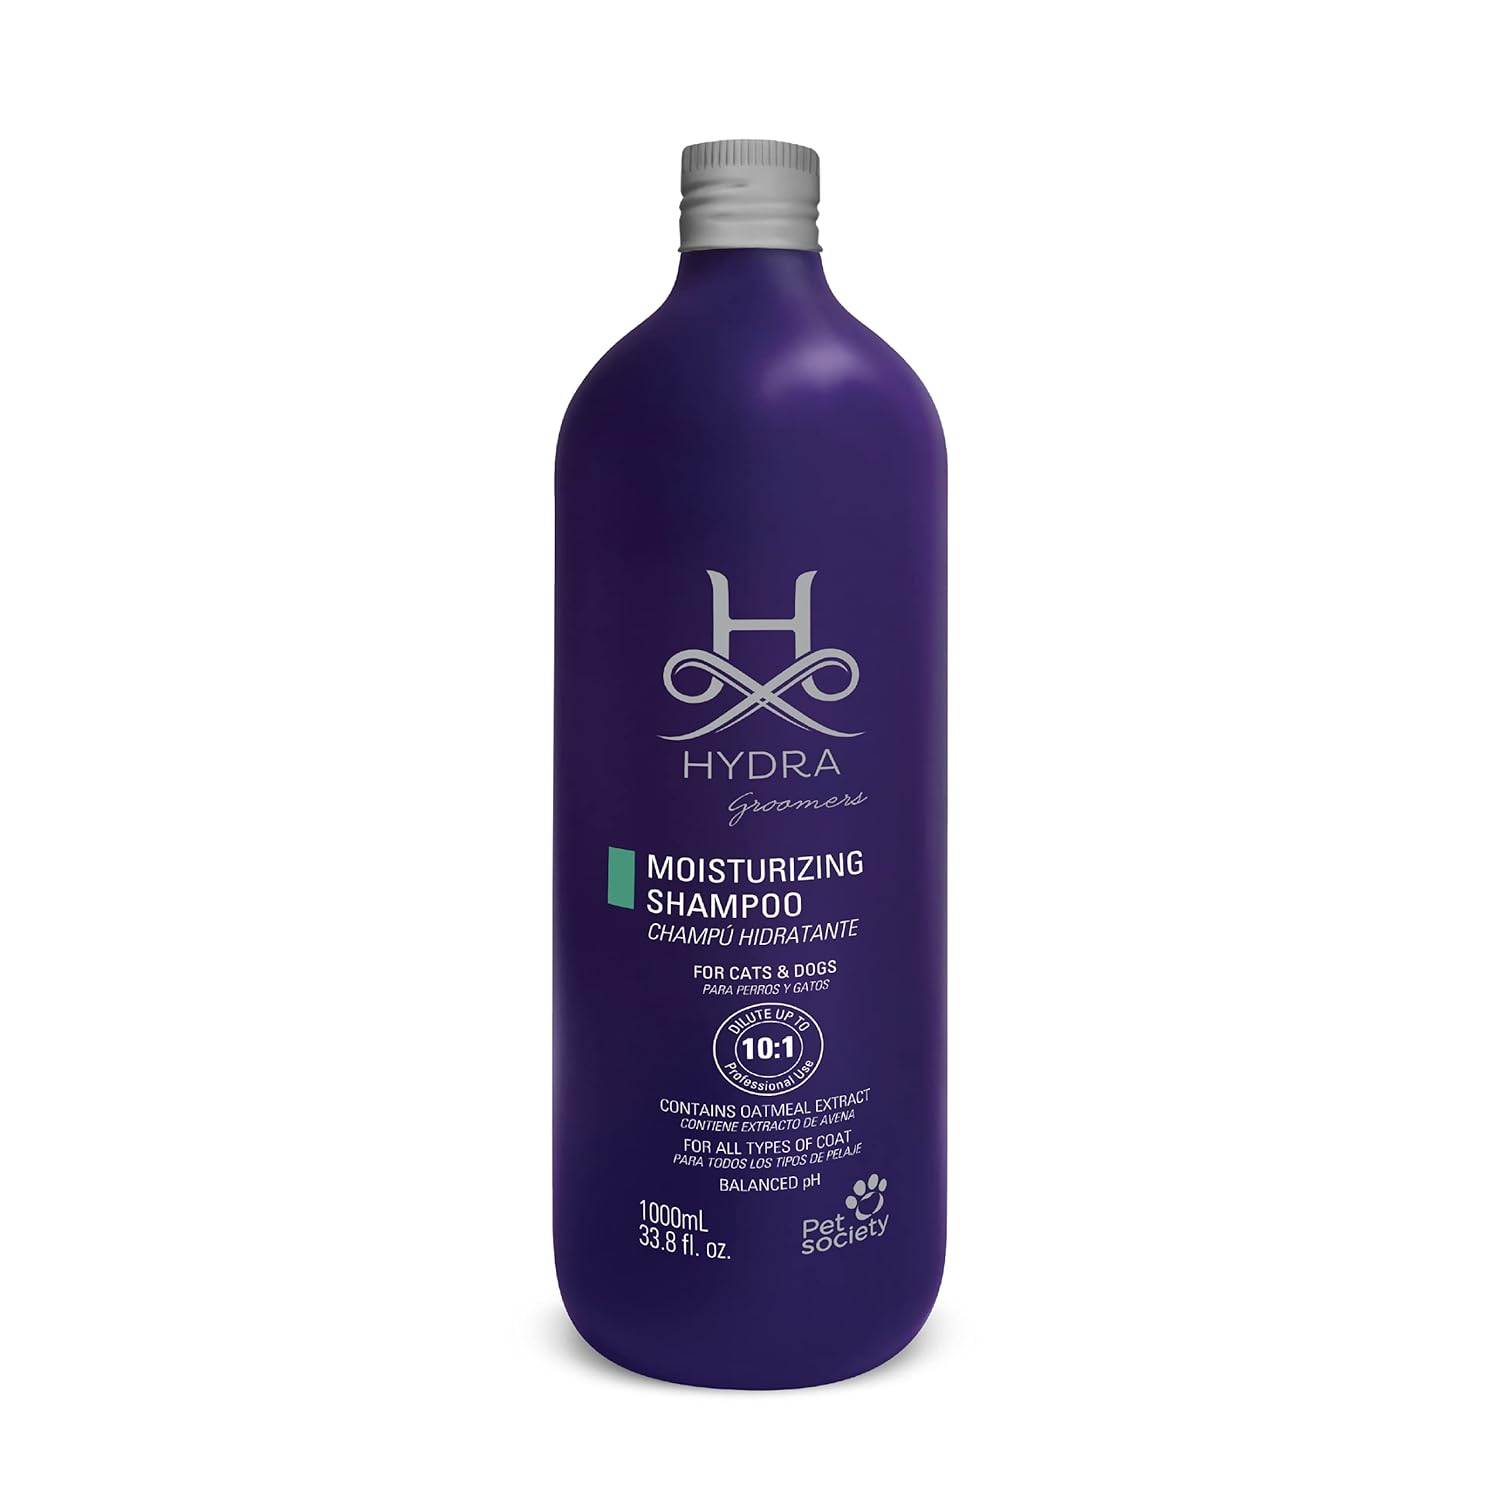 Hydra Groomer's Moisturizing Shampoo 1 Litre for Cats and Dogs Contains Optical Brightener Oatmeal Extract Moisturizes and Softens The Coat pH Balance.…